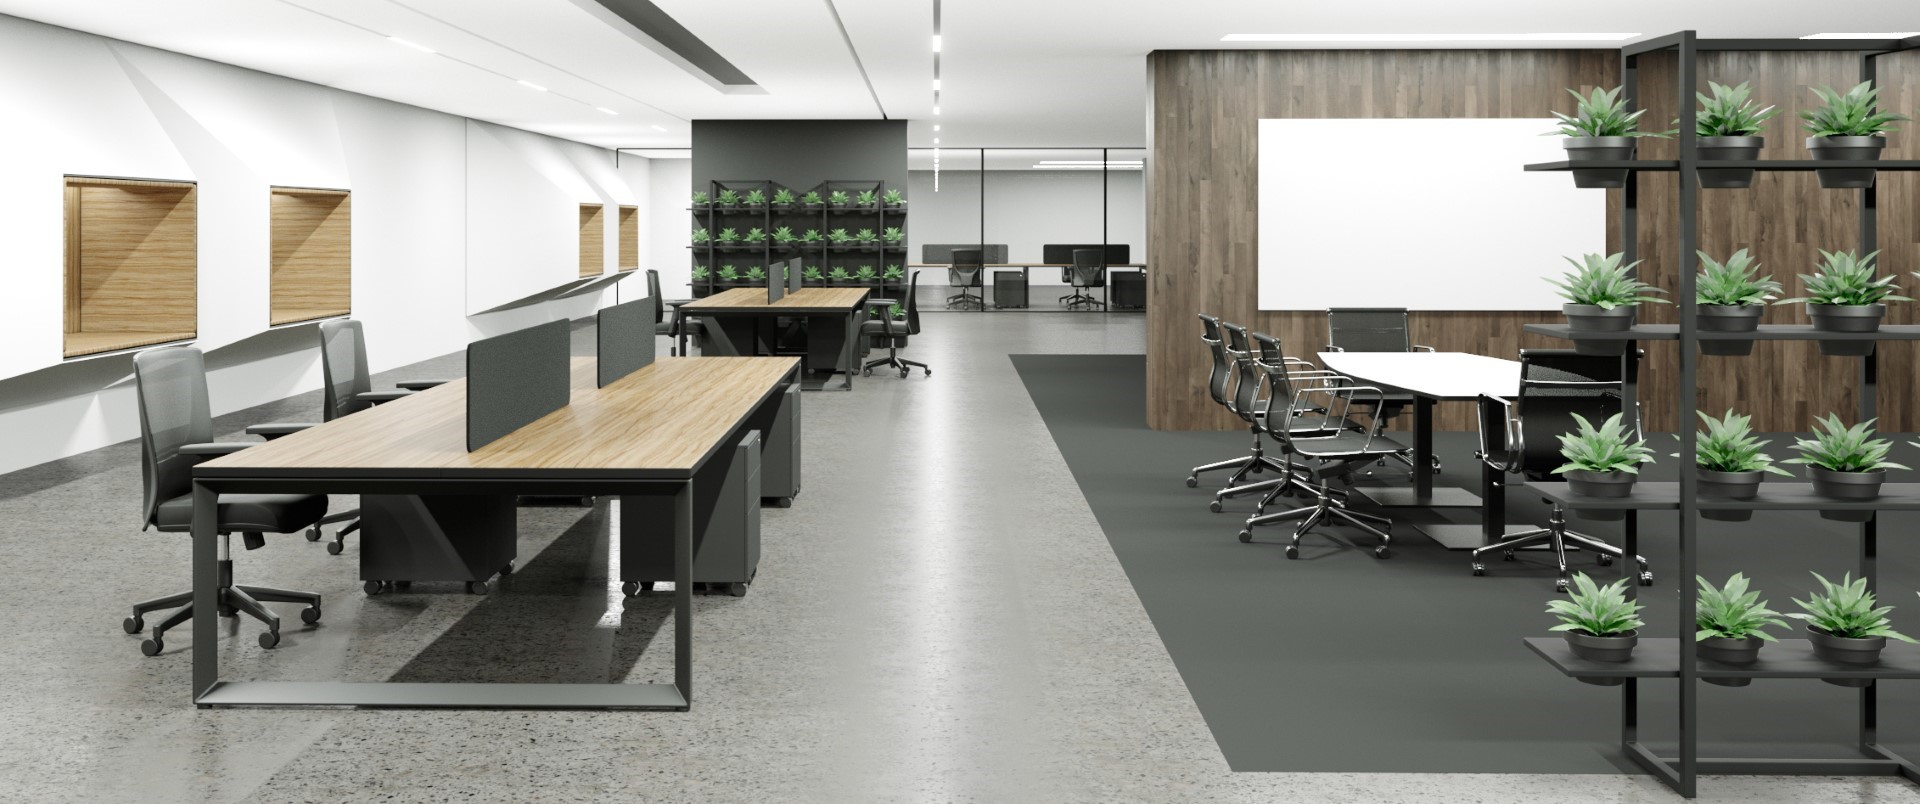 Office Furniture Sydney - Desks, Workstations, Office Chairs, Filing  Solutions